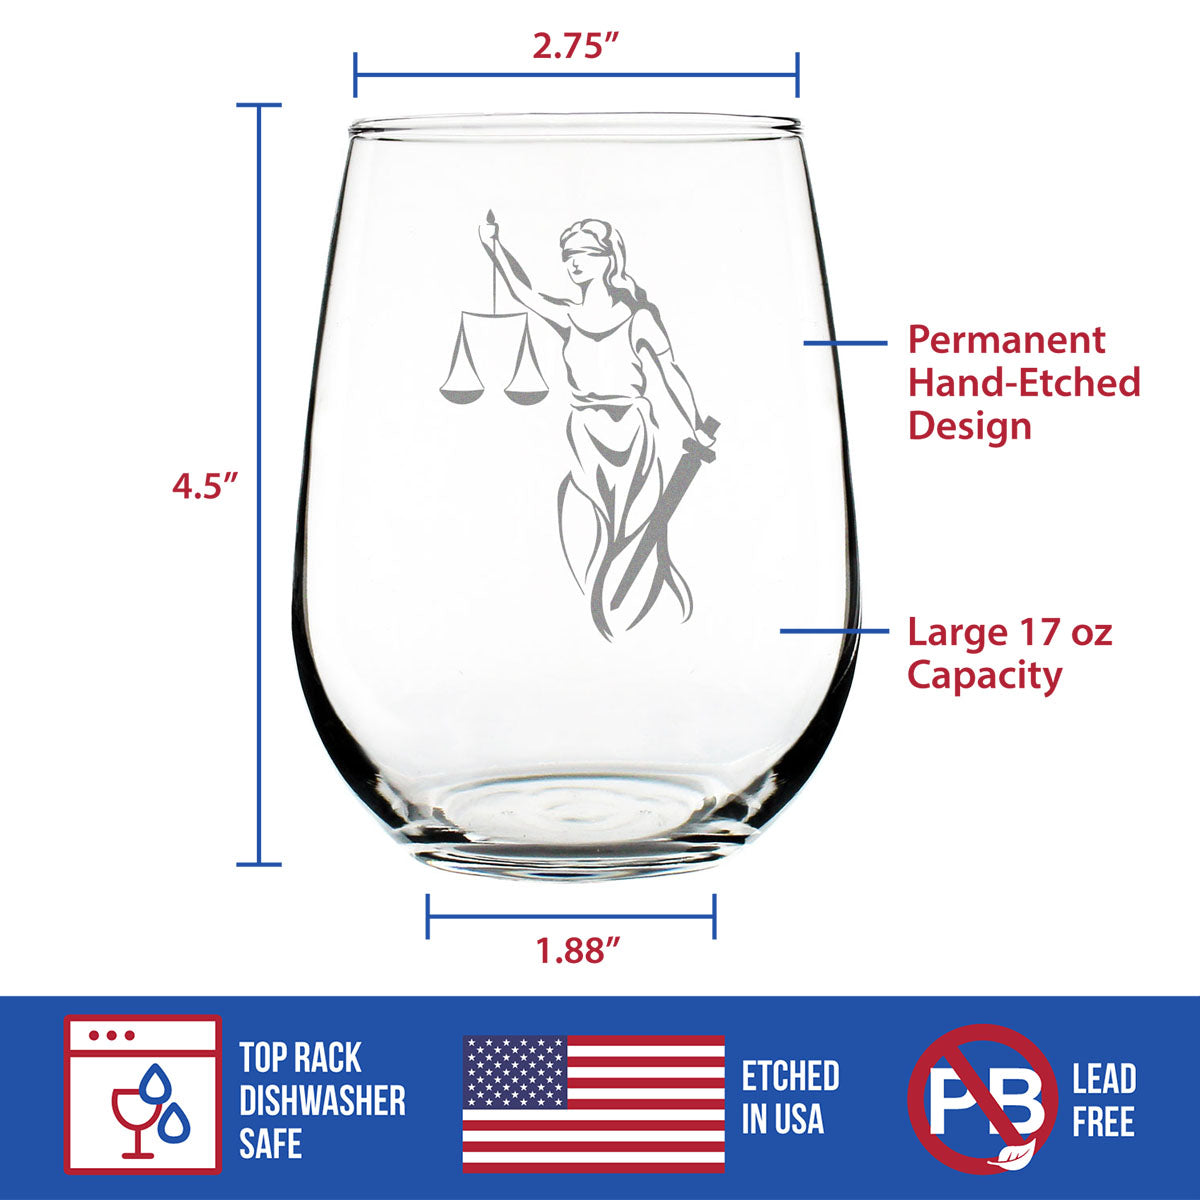 Lady Justice - Stemless Wine Glass - Lawyers and Attorneys Themed Gifts or Party Decor for Women and Men - Large 17 oz